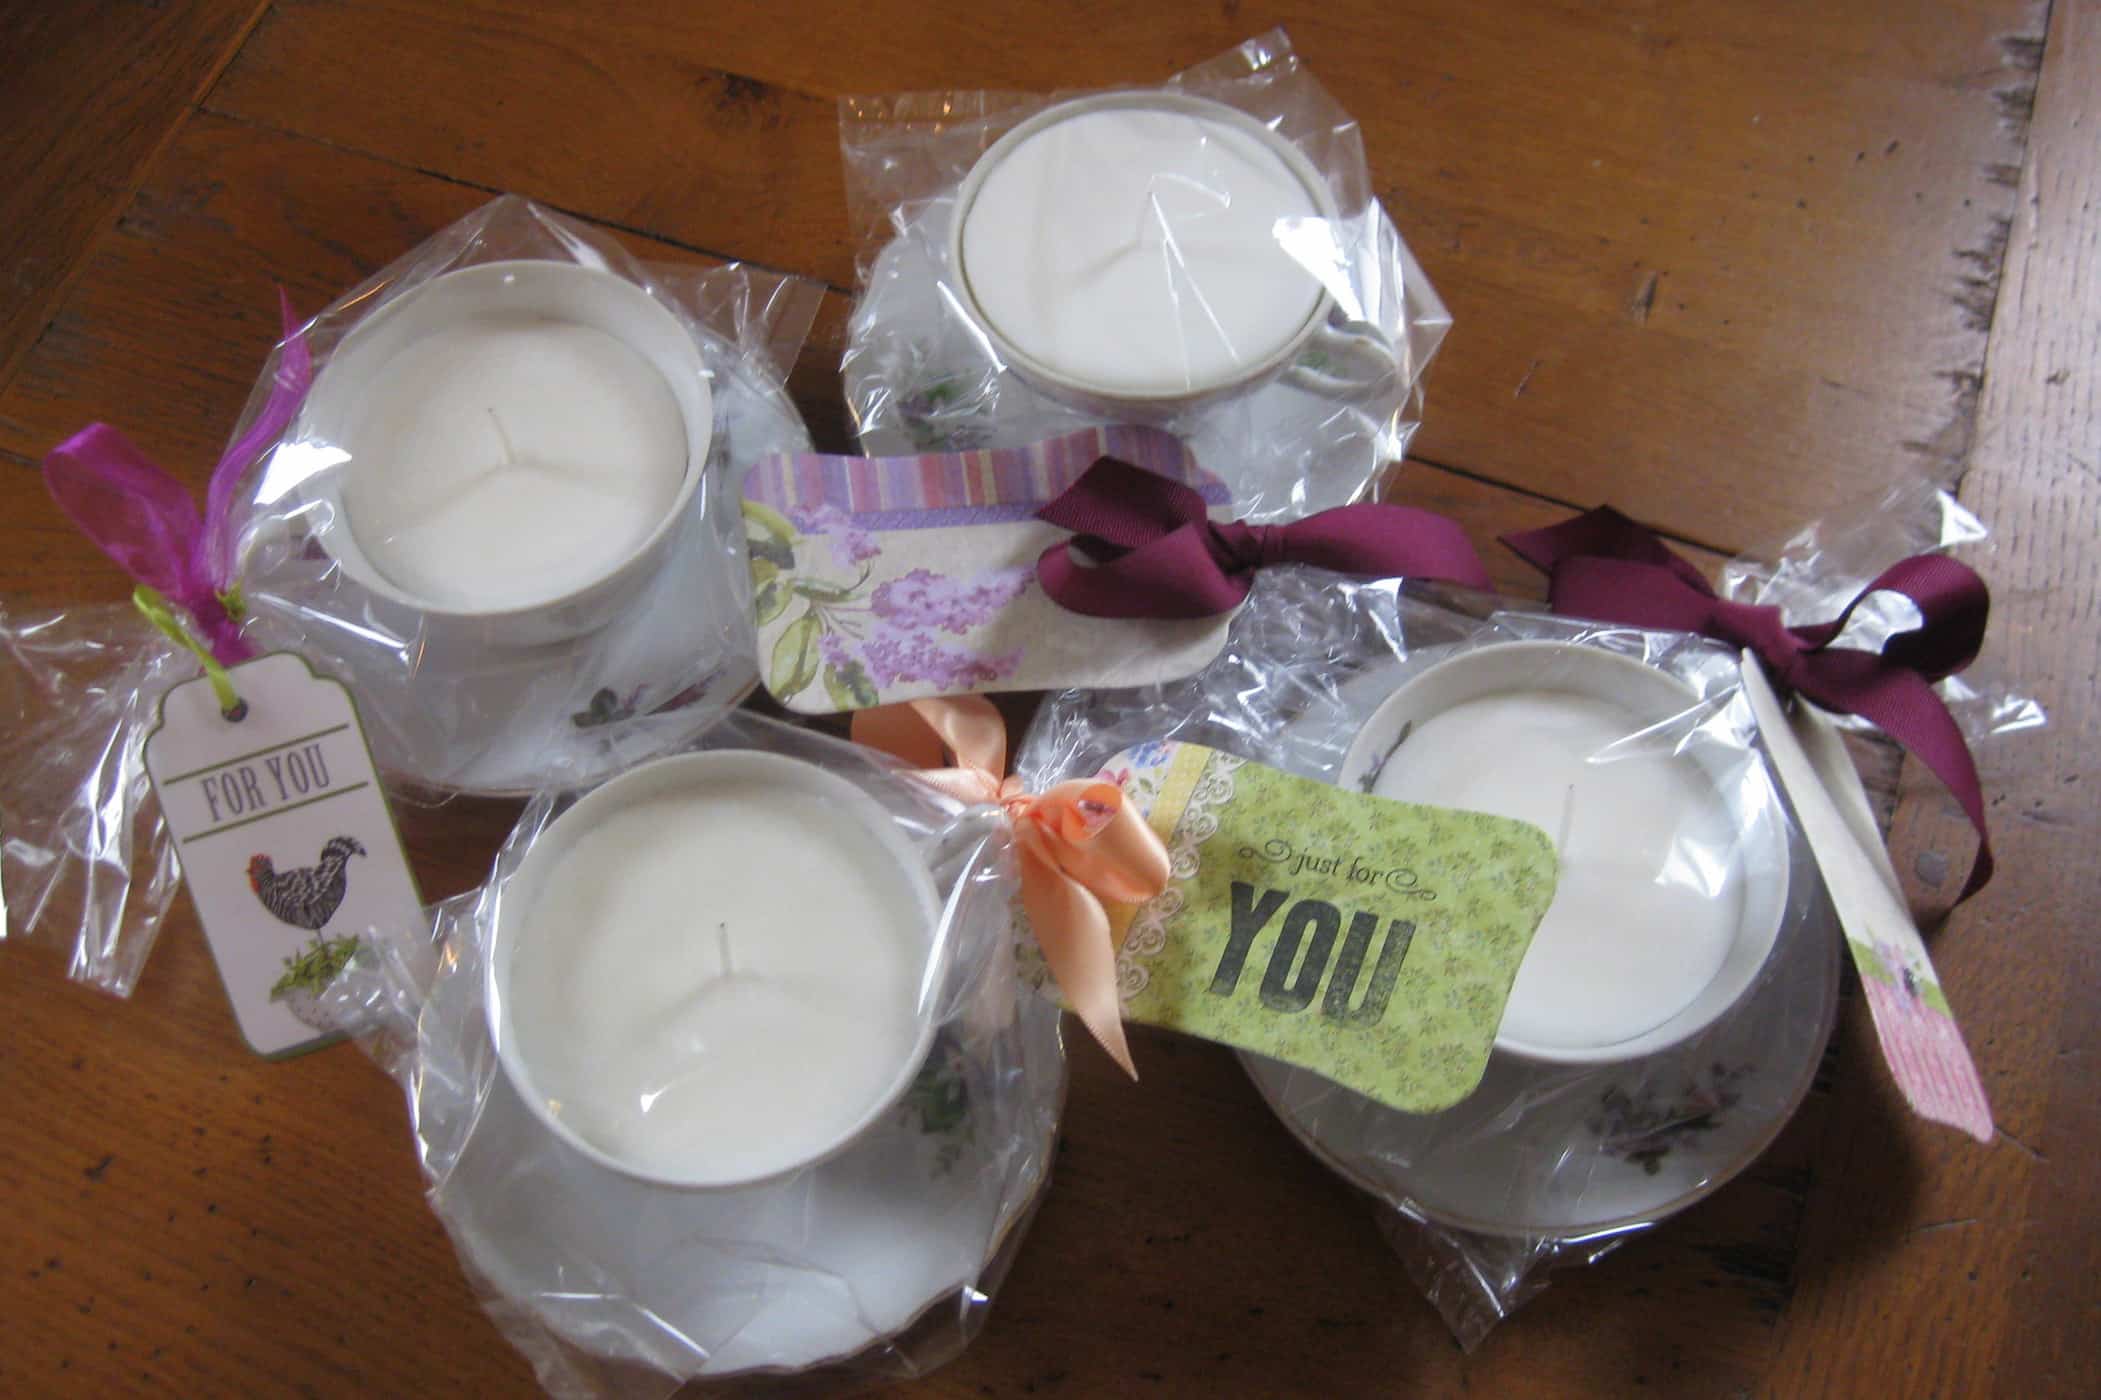 teacup candles in cellophane bags, gift wrapped with tags